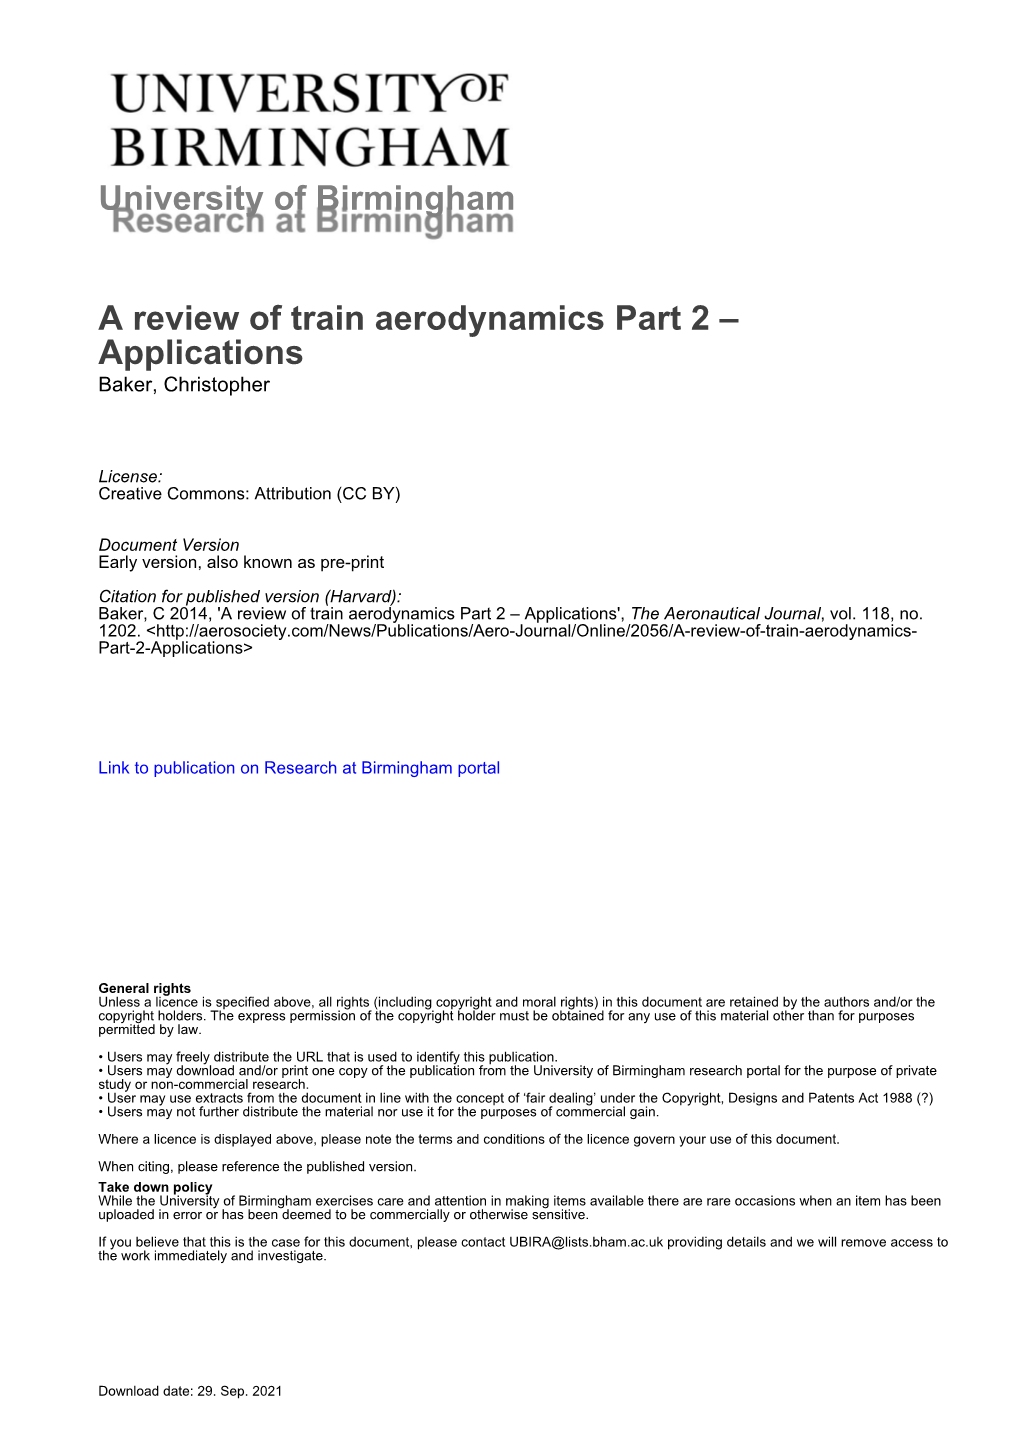 A Review of Train Aerodynamics Part 2 – Applications Baker, Christopher